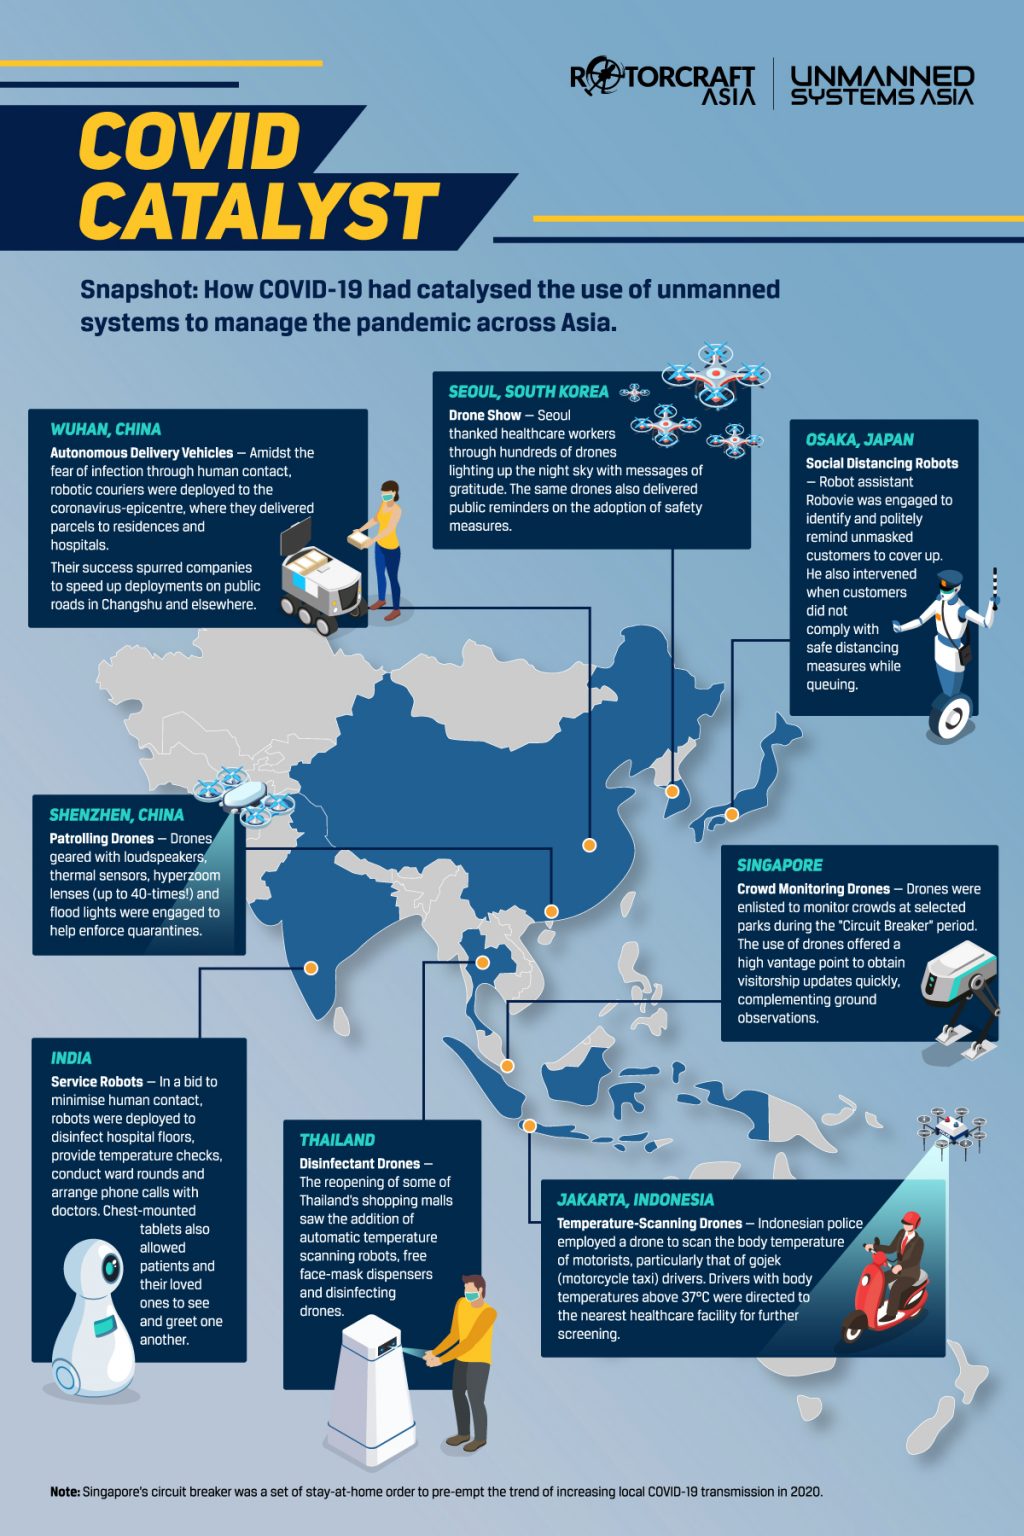 Covid catalyst – A look at how COVID-19 had catalysed the use of unmanned systems to manage the pandemic across Asia.